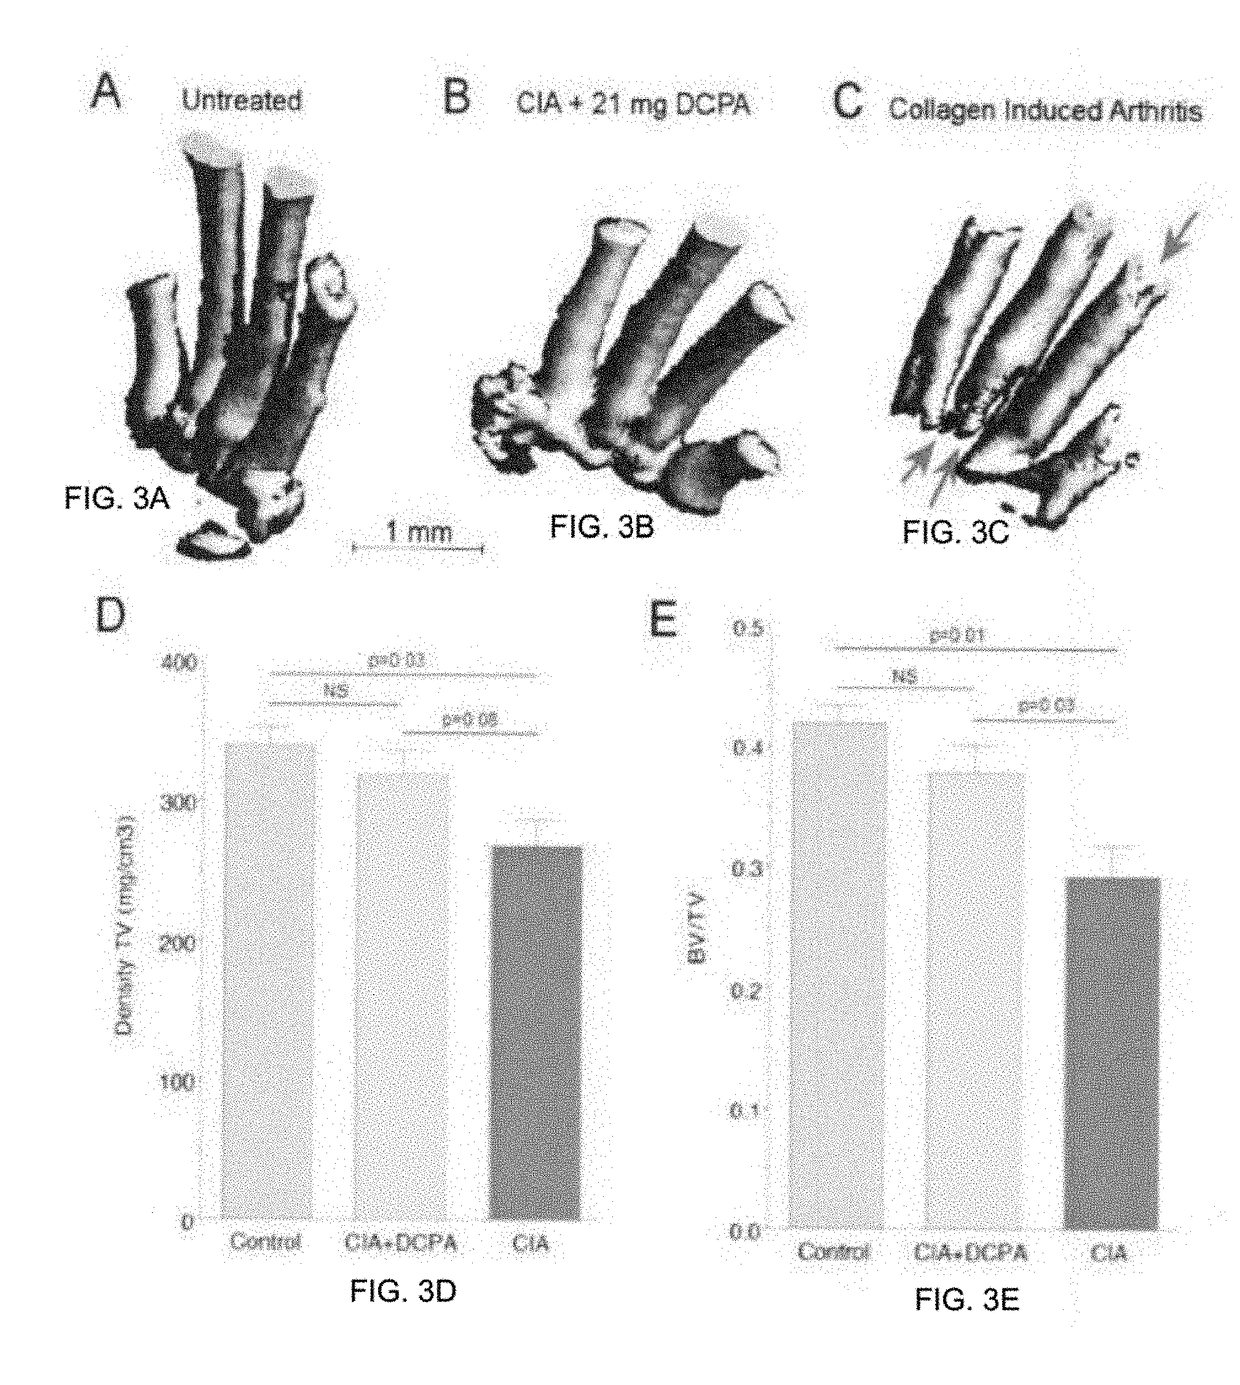 Water Soluble Haloanilide Calcium-Release Calcium Channel Inhibitory Compounds and Methods to Control Bone Erosion and Inflammation Associated with Arthritides